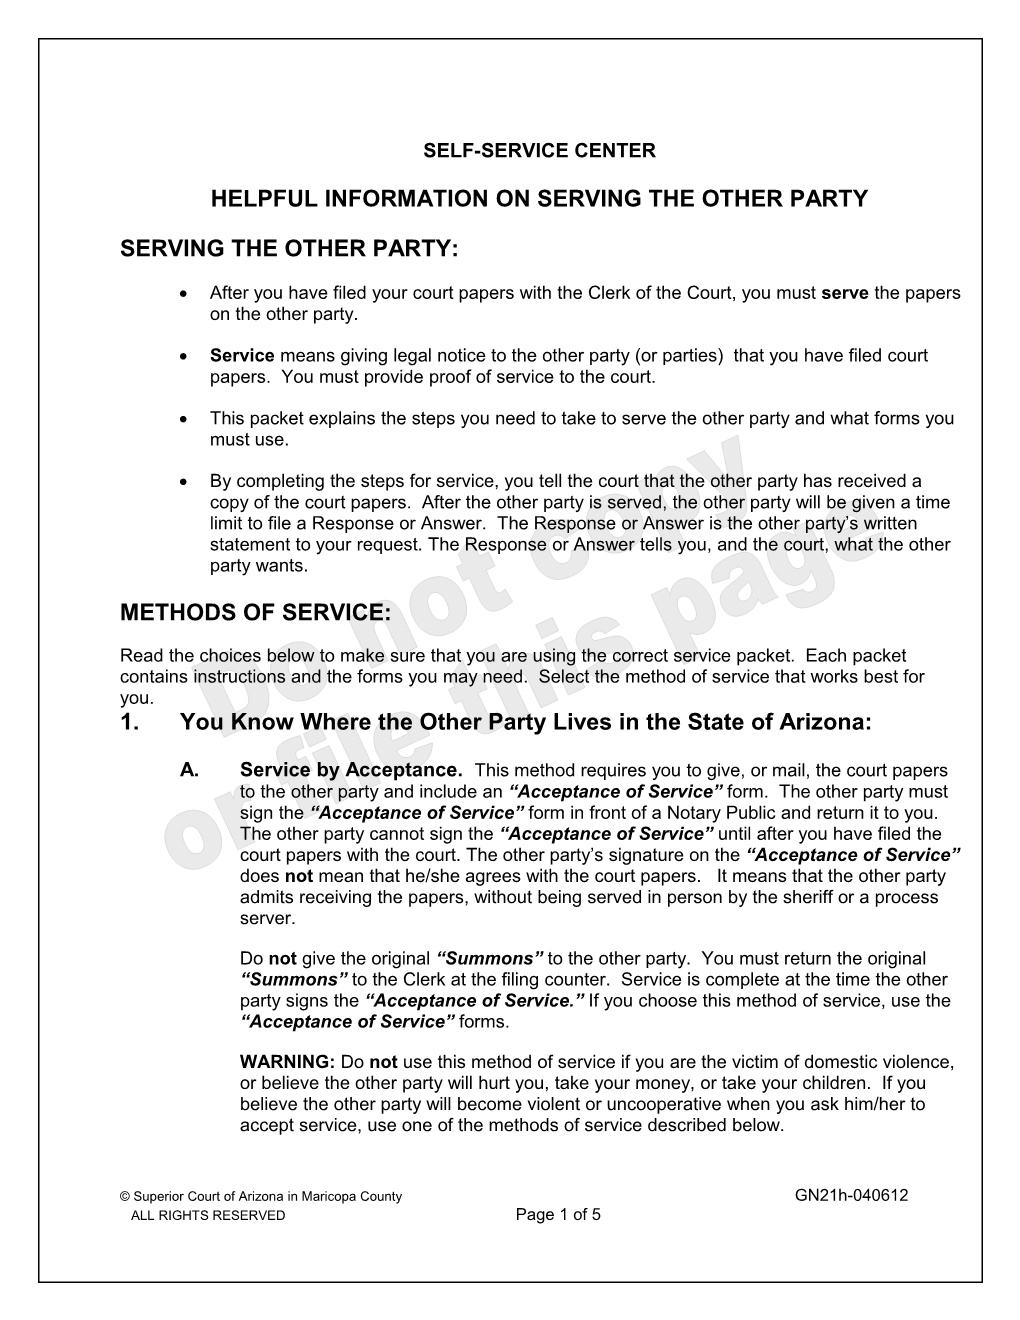 Helpful Information on Serving the Other Party